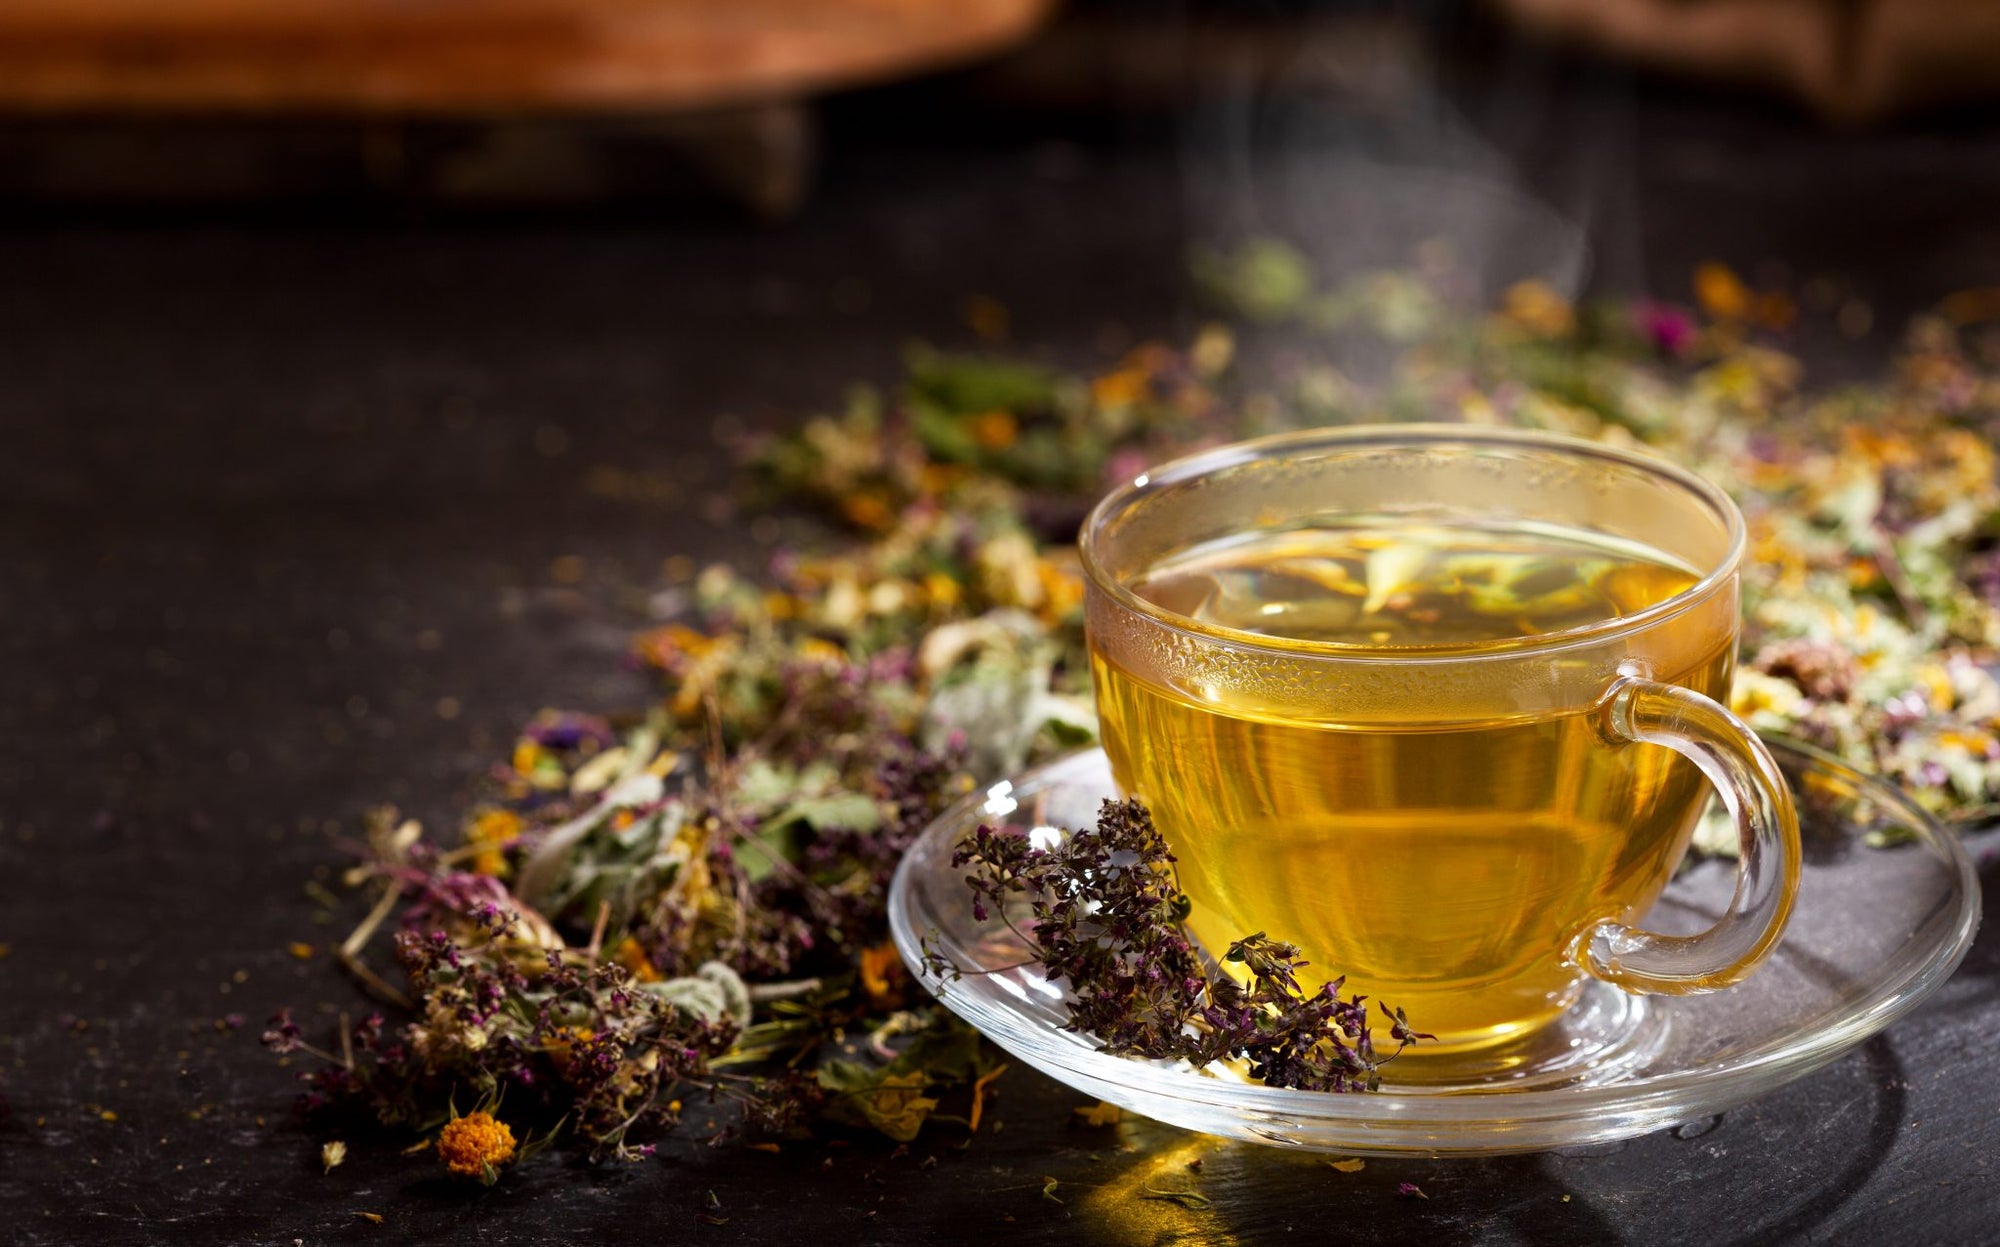 7 Top Herbal Teas and Their Health Benefits